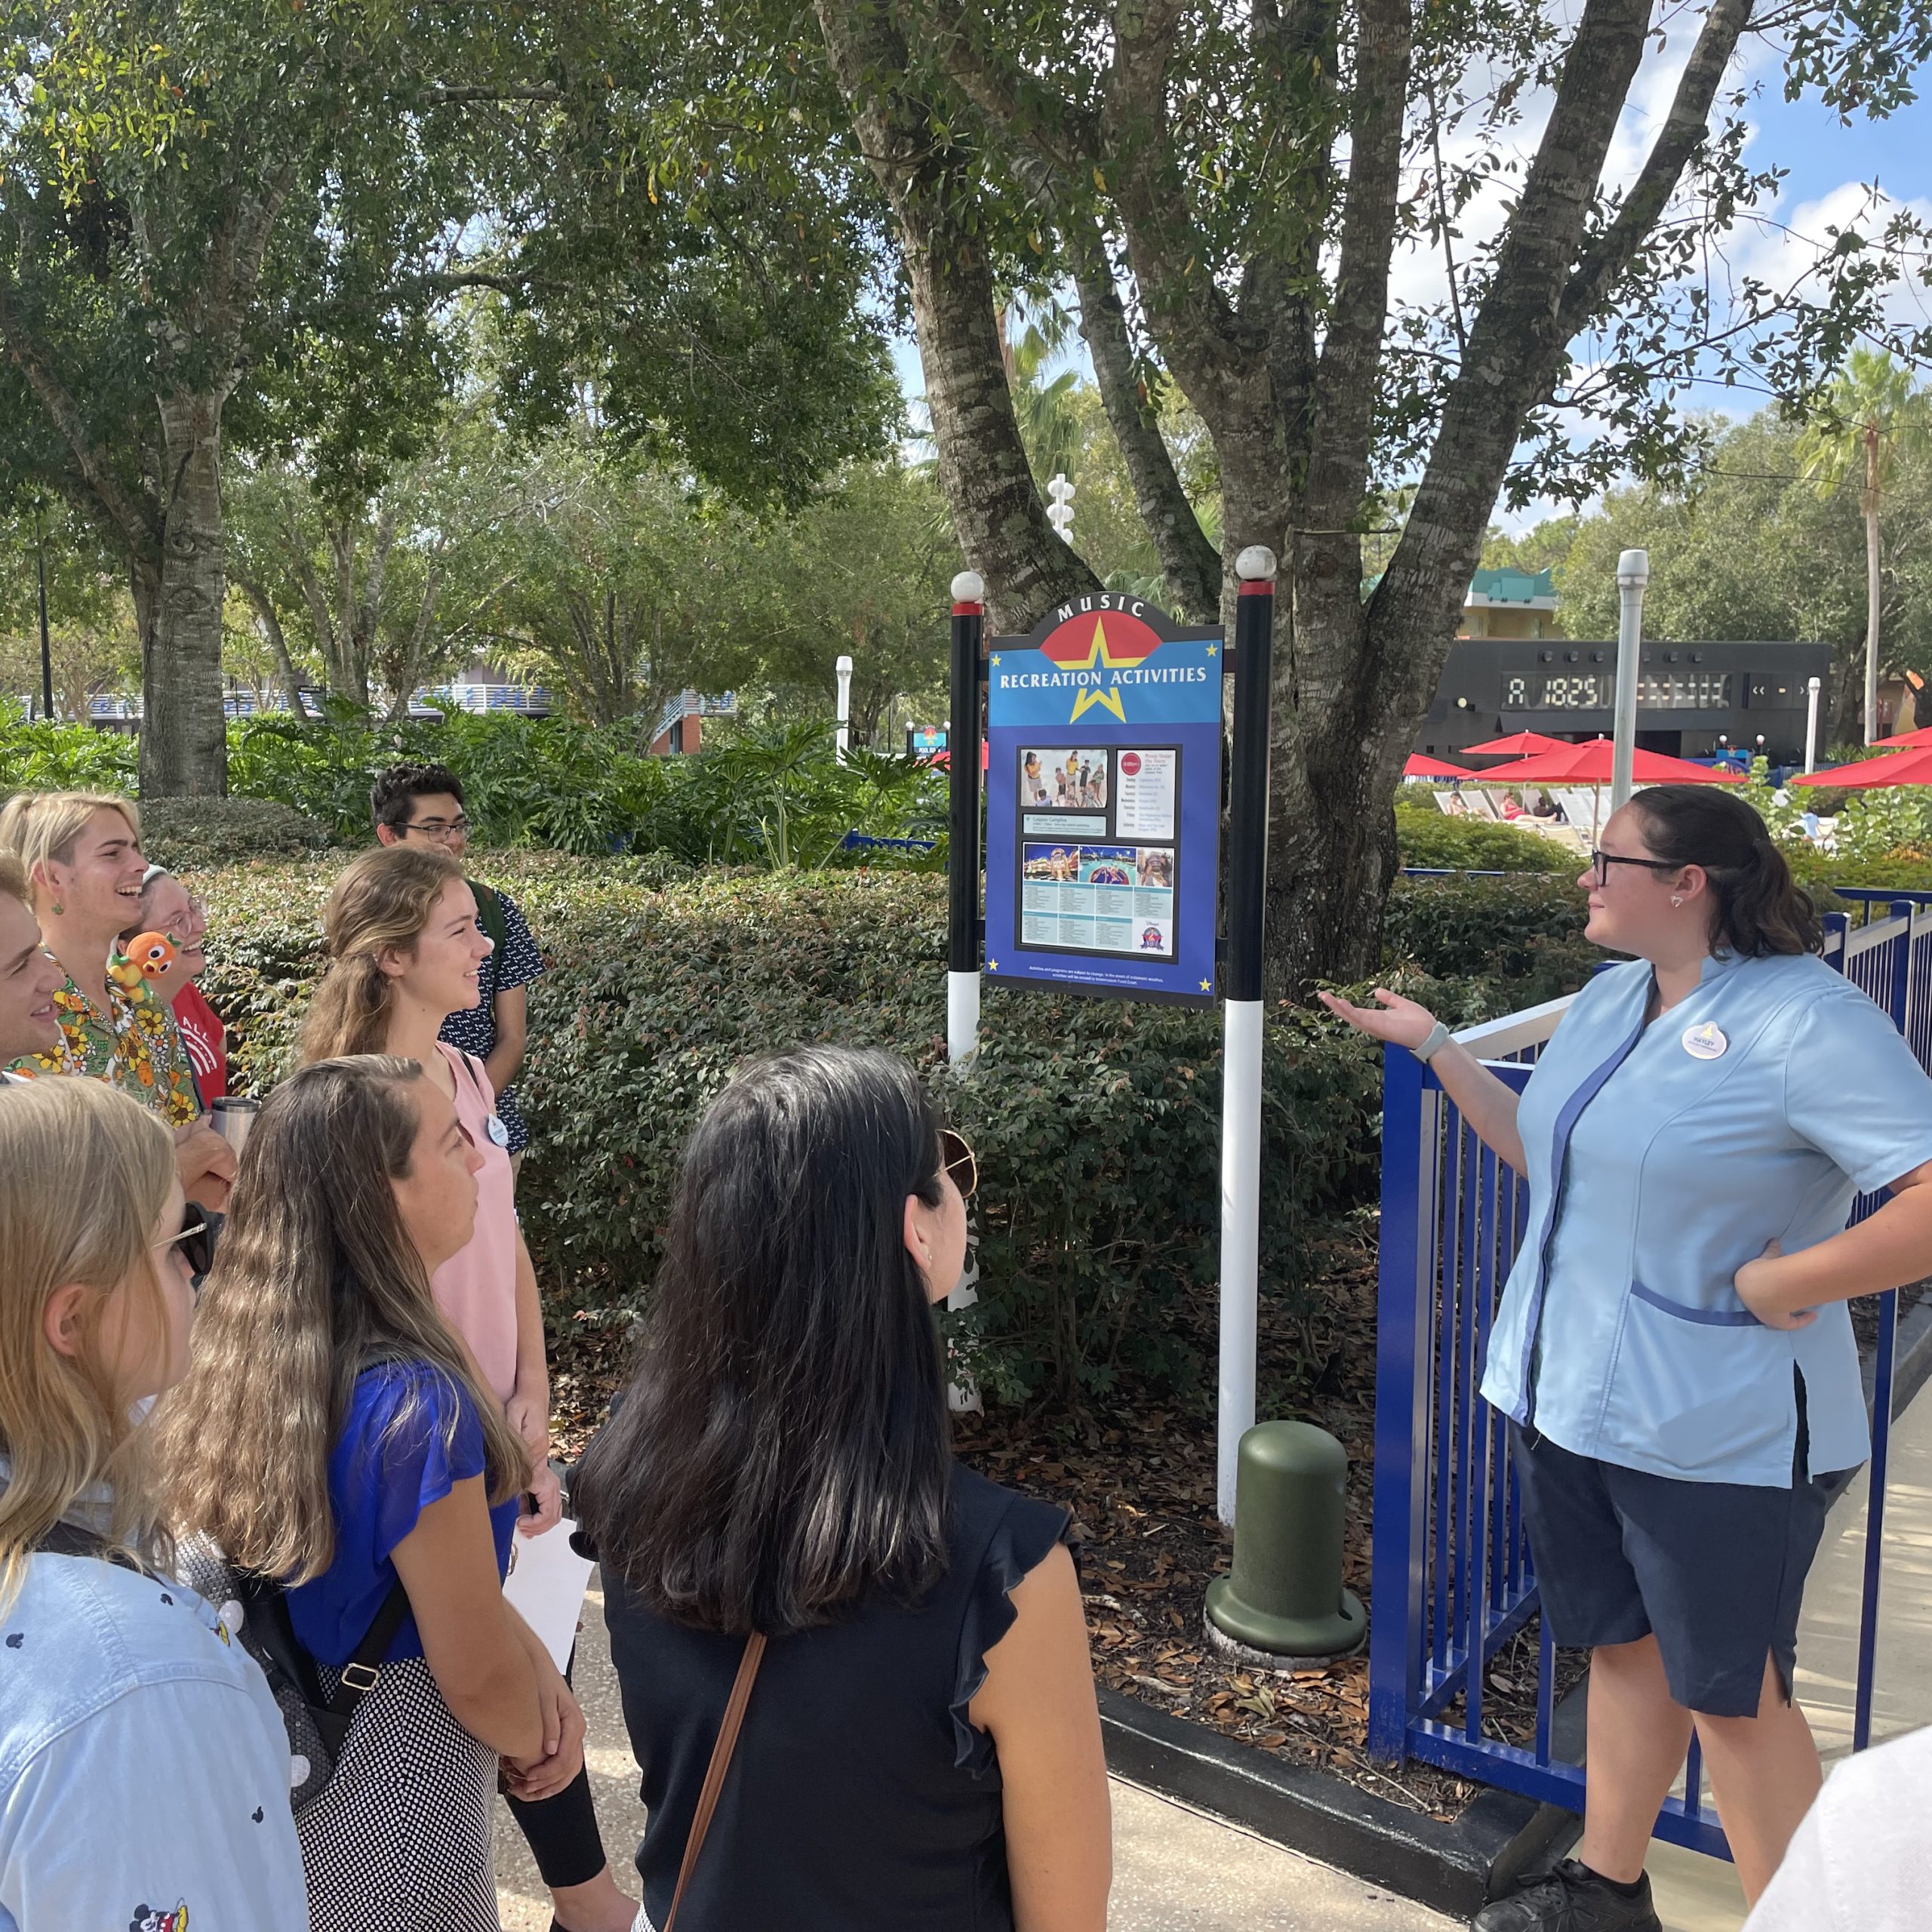 Disney college program participant speaking to a group of visitors at an outdoor location at the Walt Disney World Resort